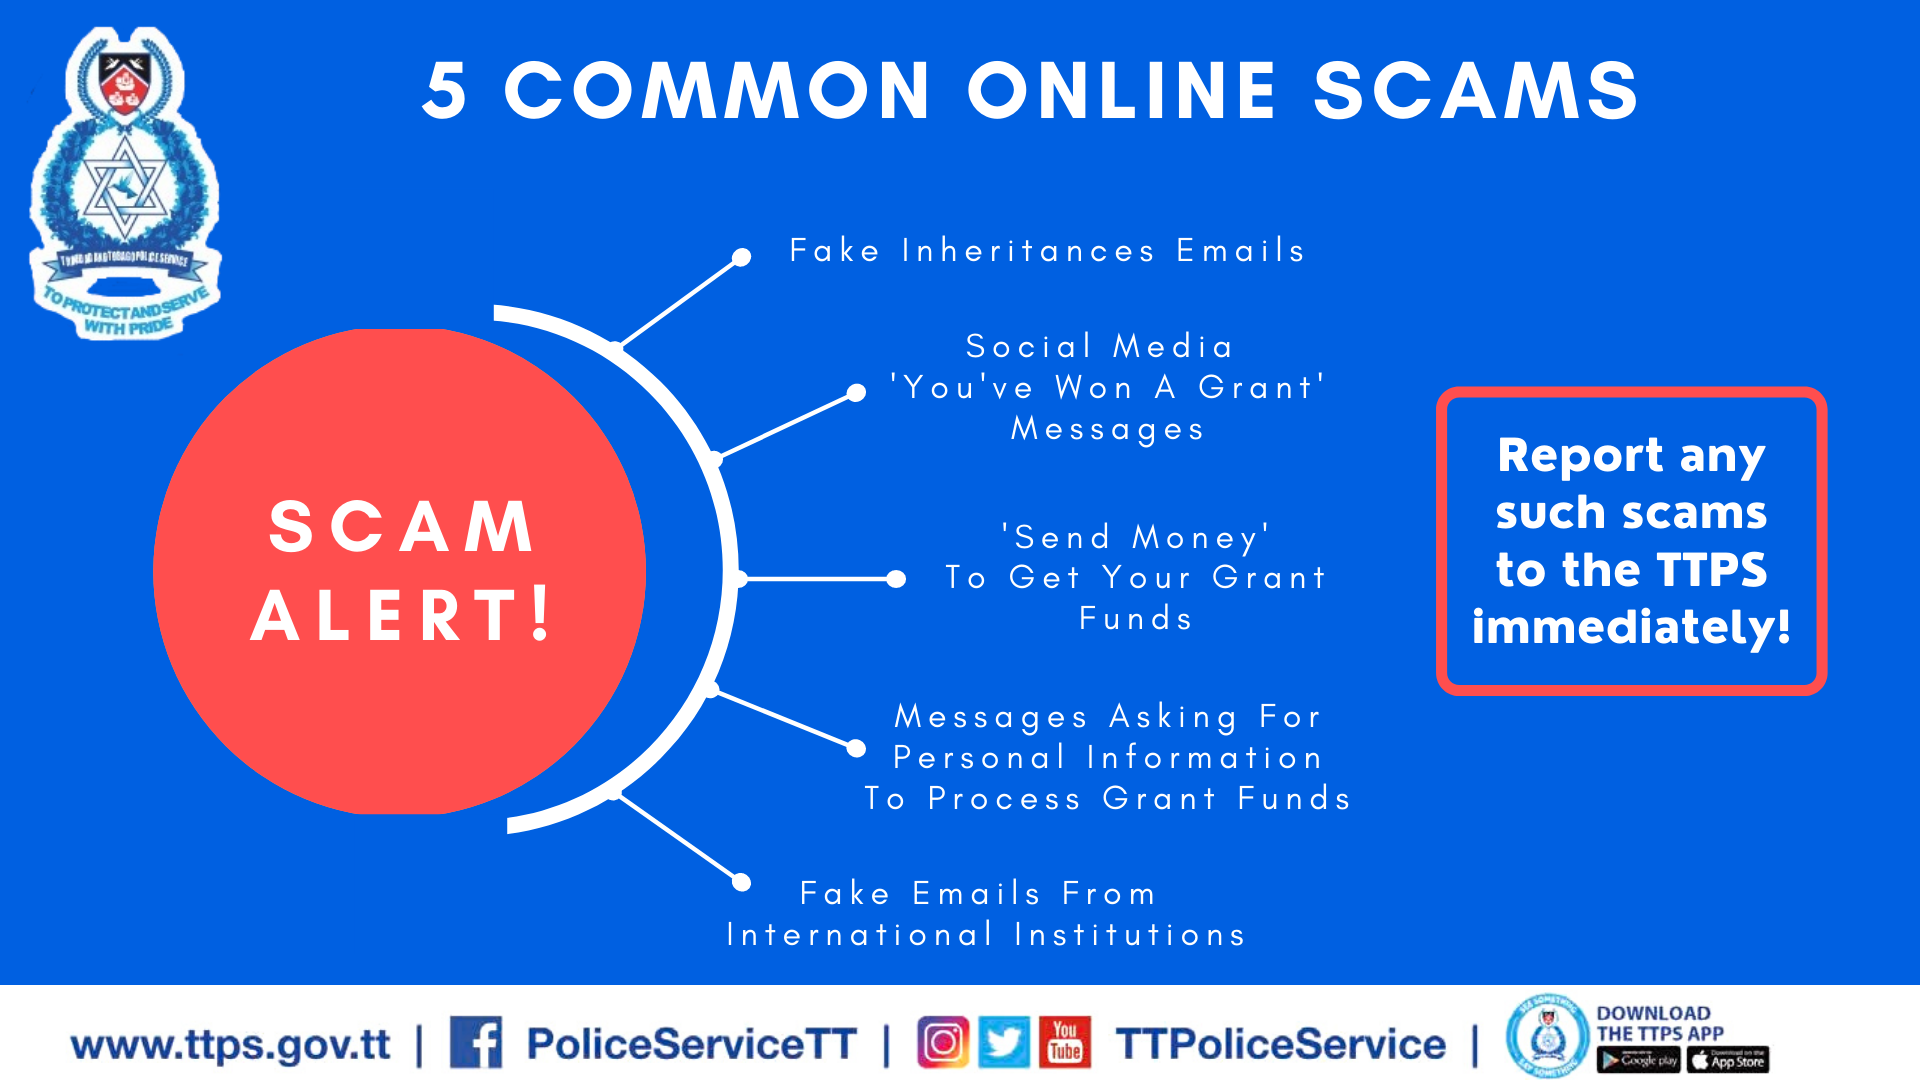 5 common online scams